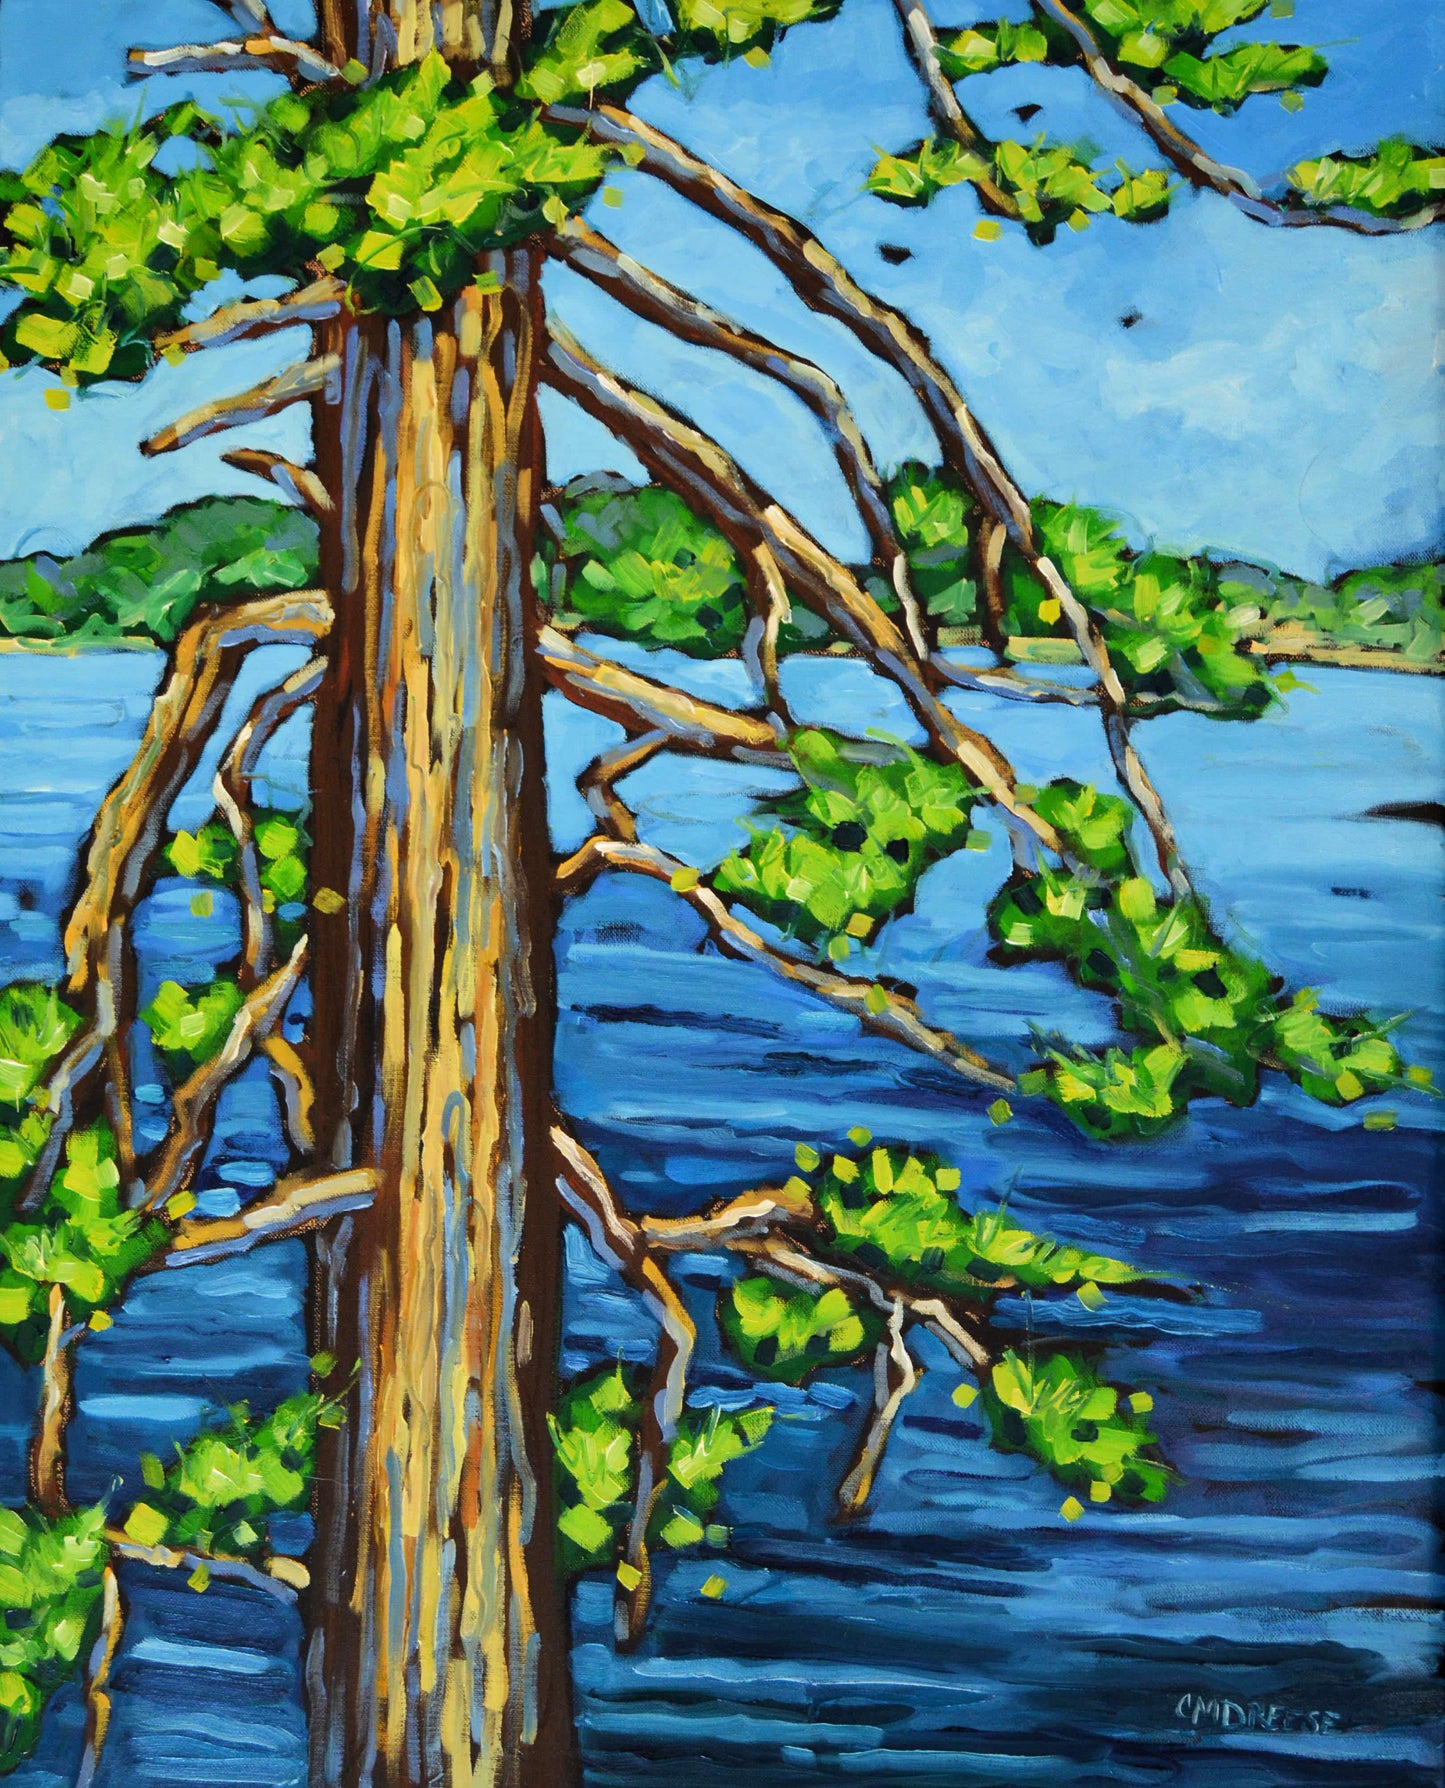 "Old Pine Scenic Views" Original Oil Painting on Canvas by Christi Dreese